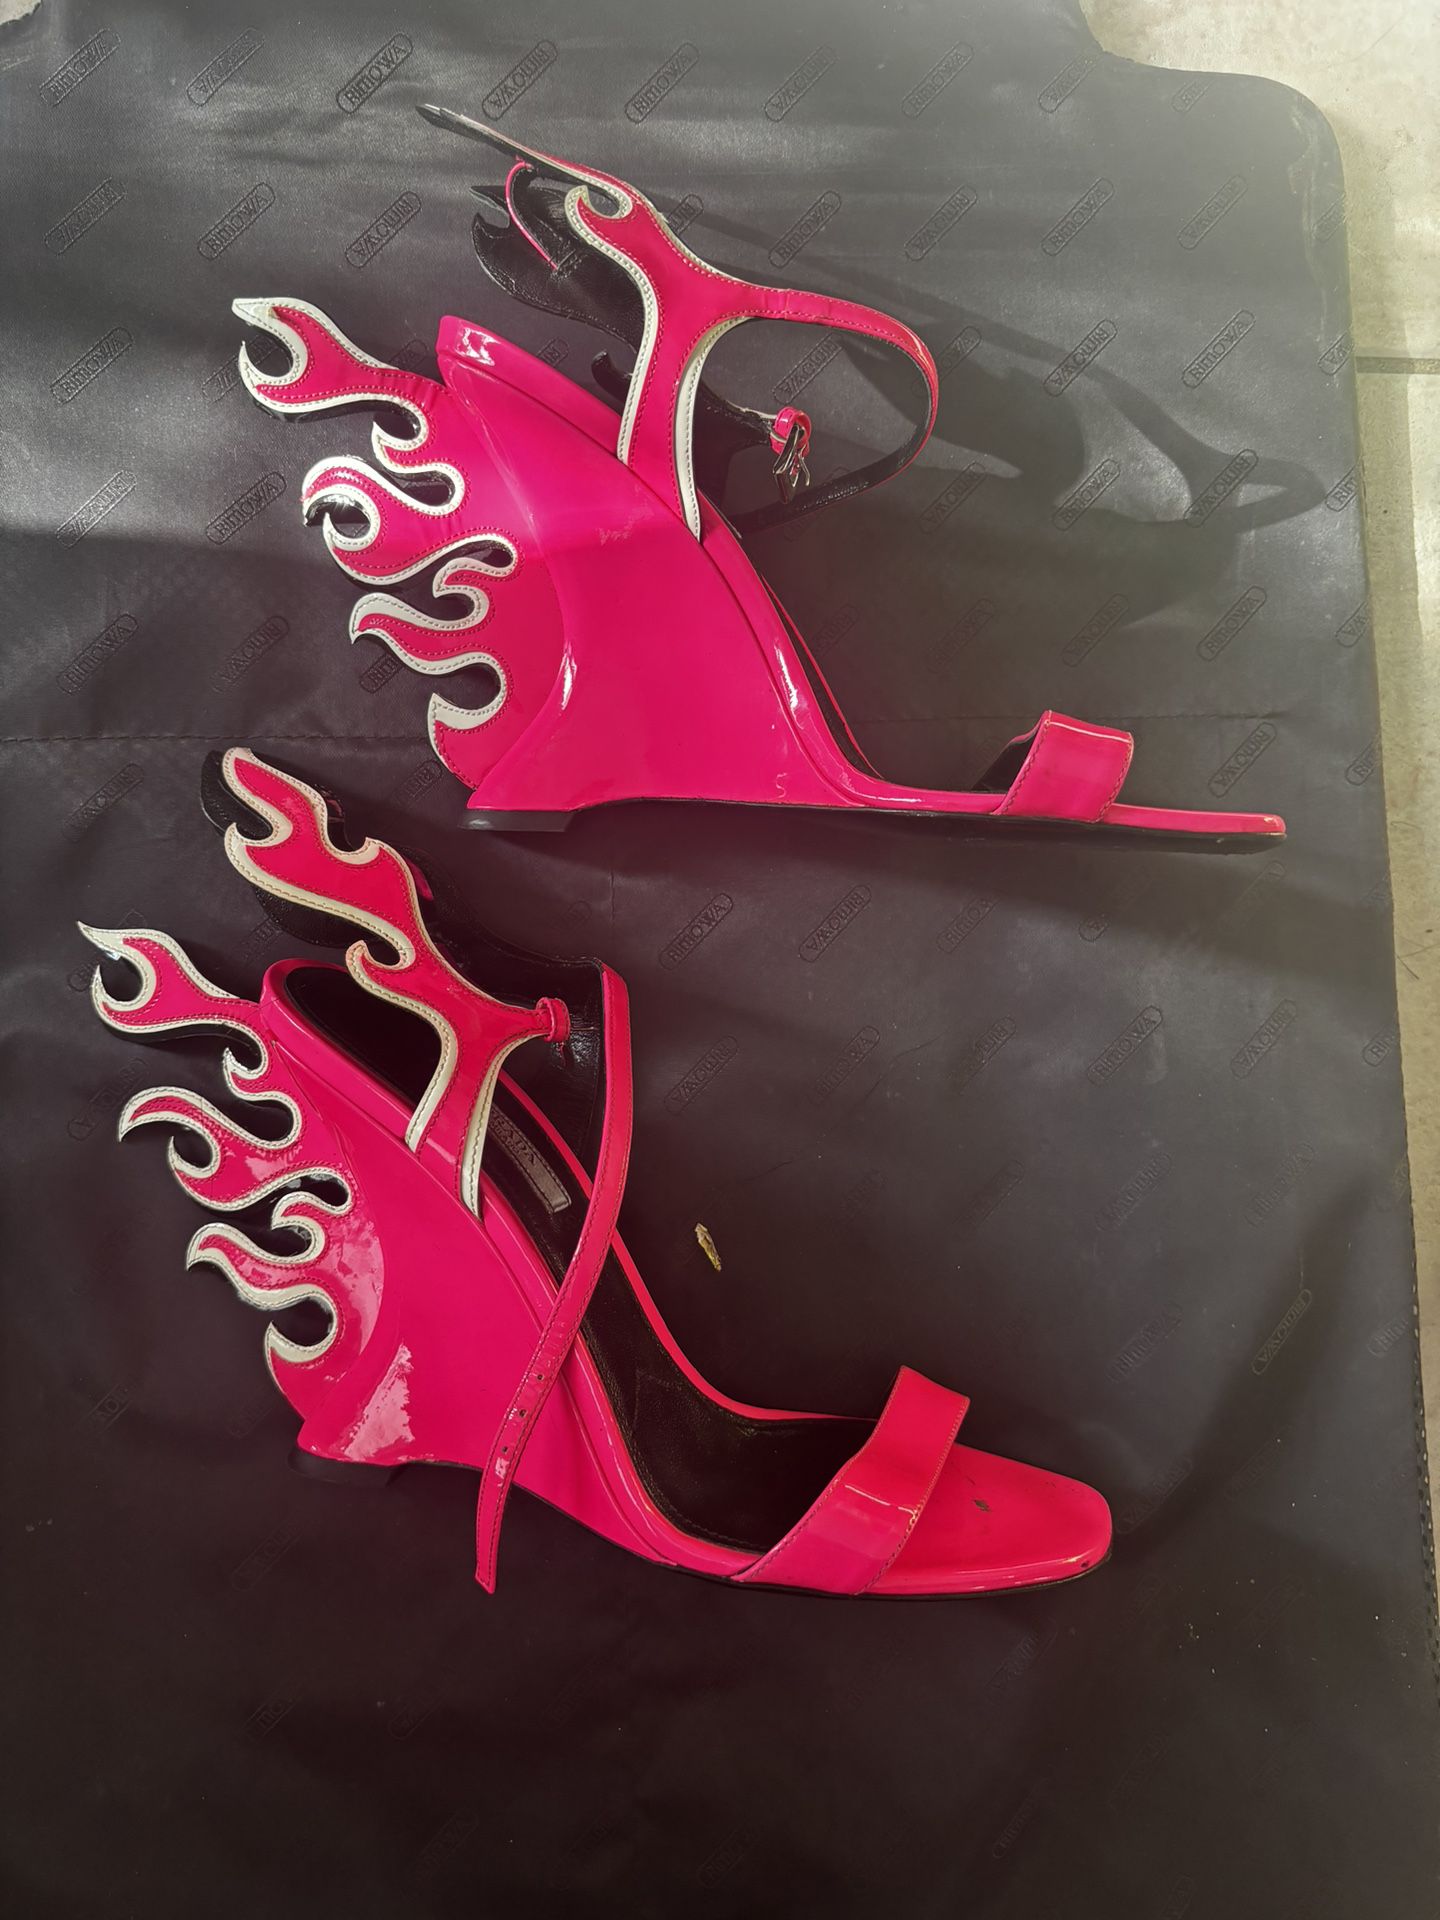 Prada flame wedge heels y2k fire sandals hot Barbie pink shoes patent leather